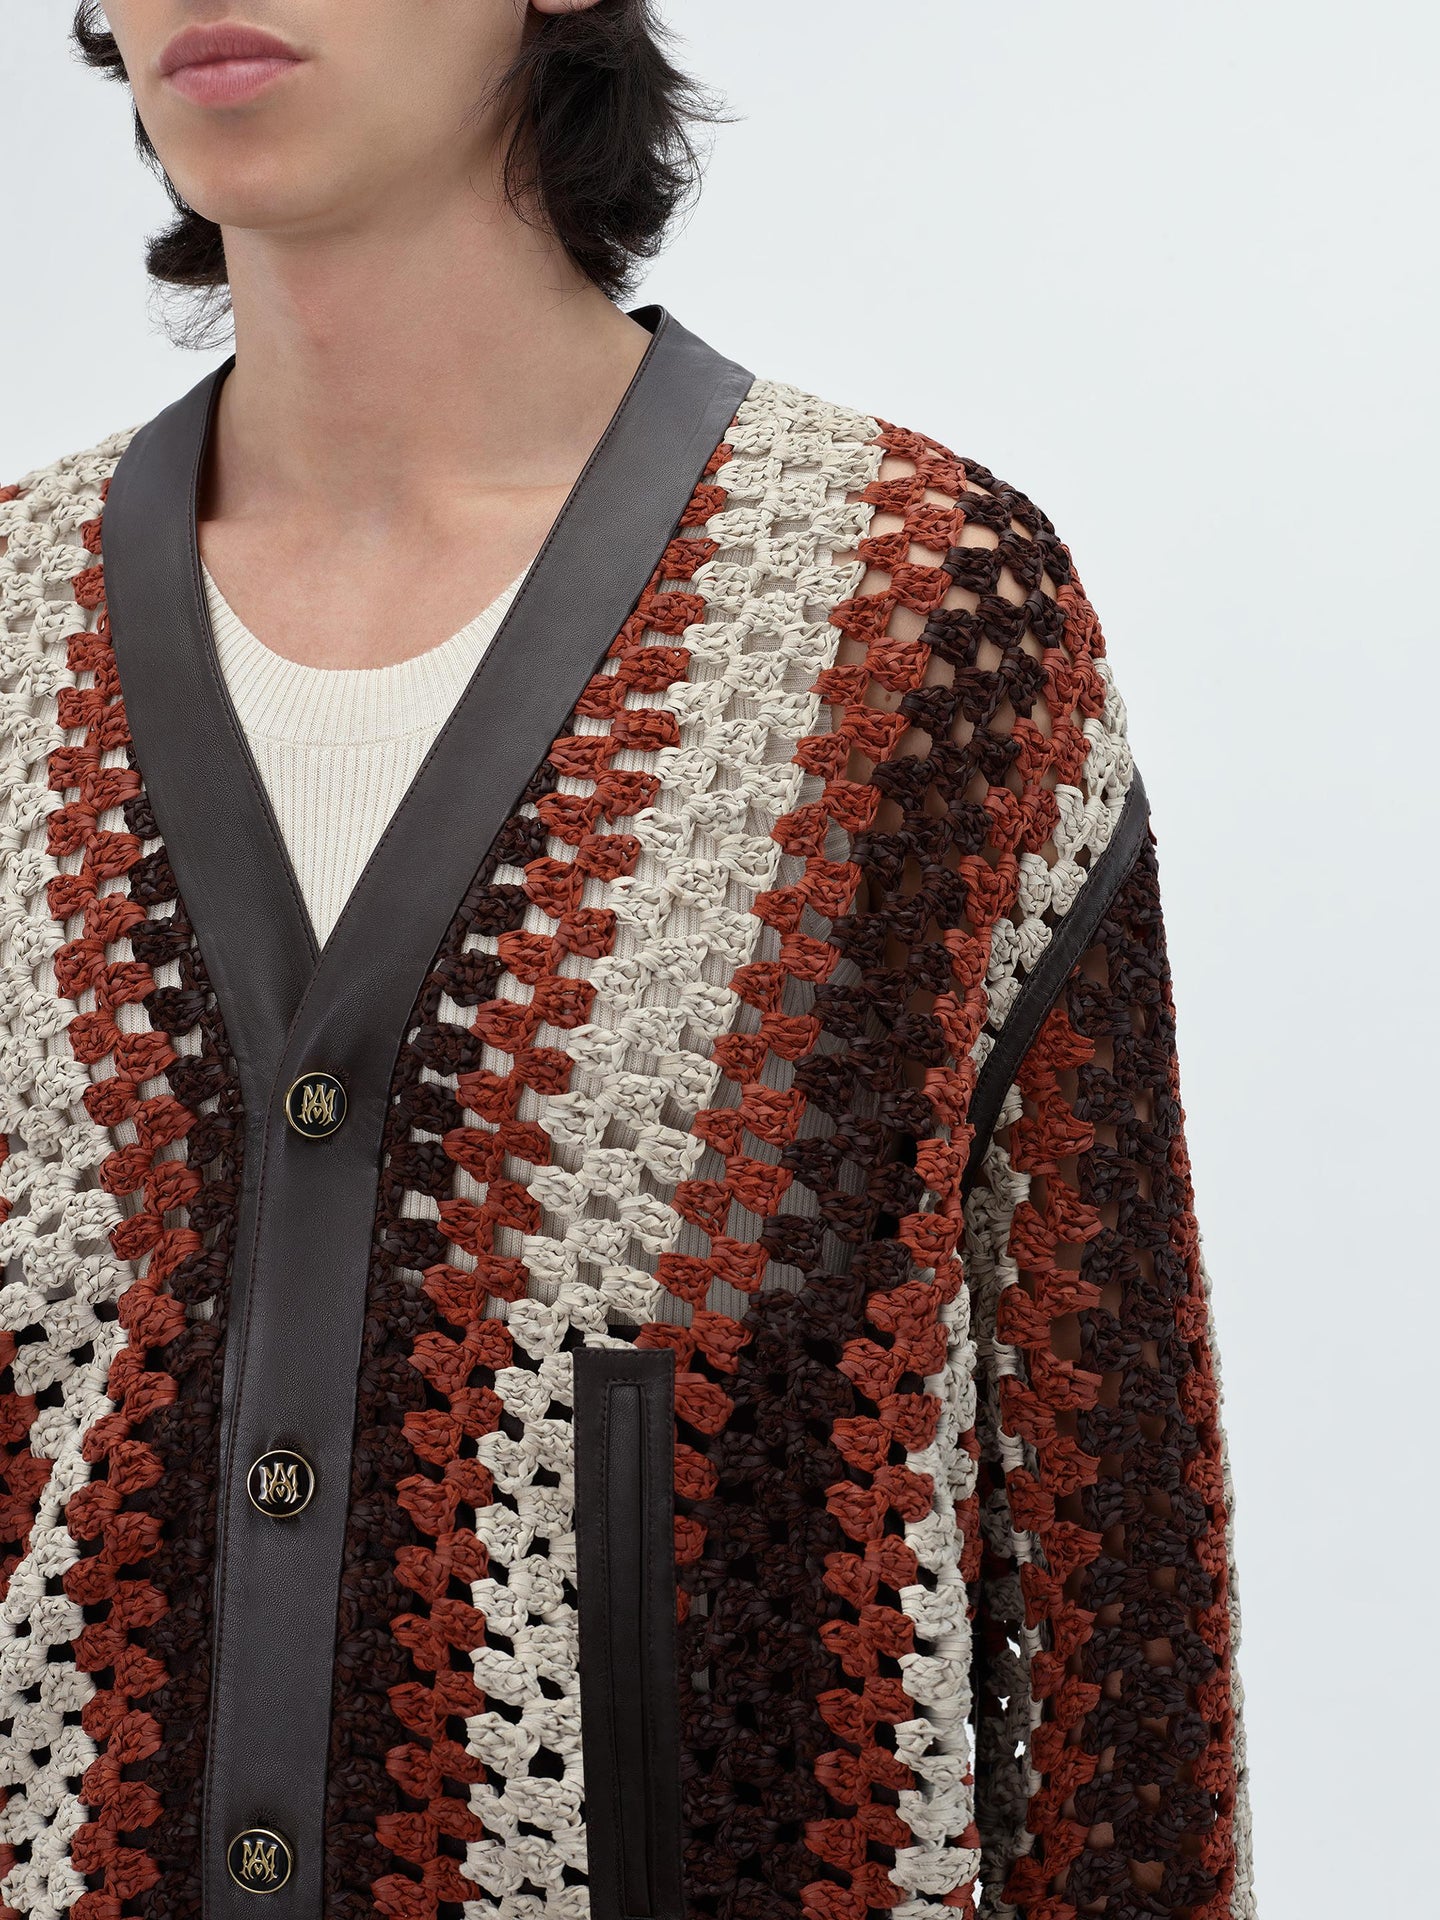 CROCHET KNIT LEATHER CARDIGAN - Shaved Chocolate